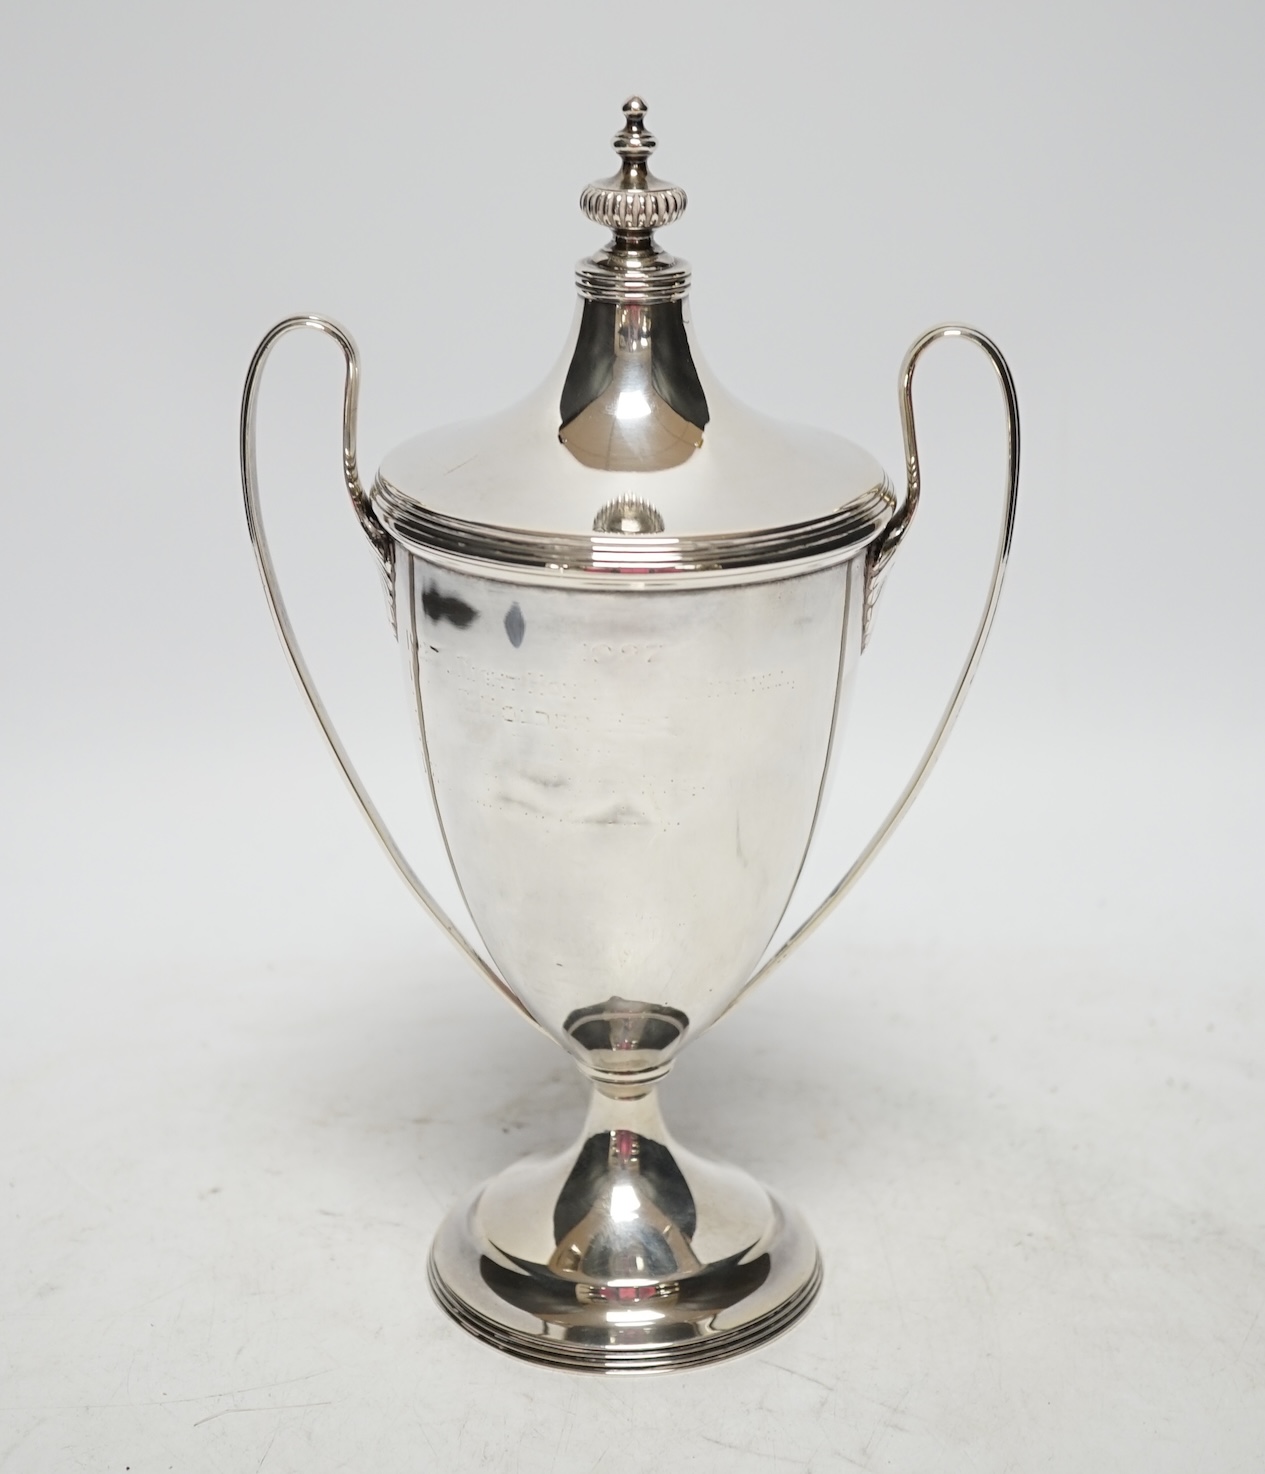 A George V silver two handled urn shaped cup and cover, Goldsmiths & Silversmiths Co Ltd, London, 1922, 23.5cm, 9.8oz. Fair condition.